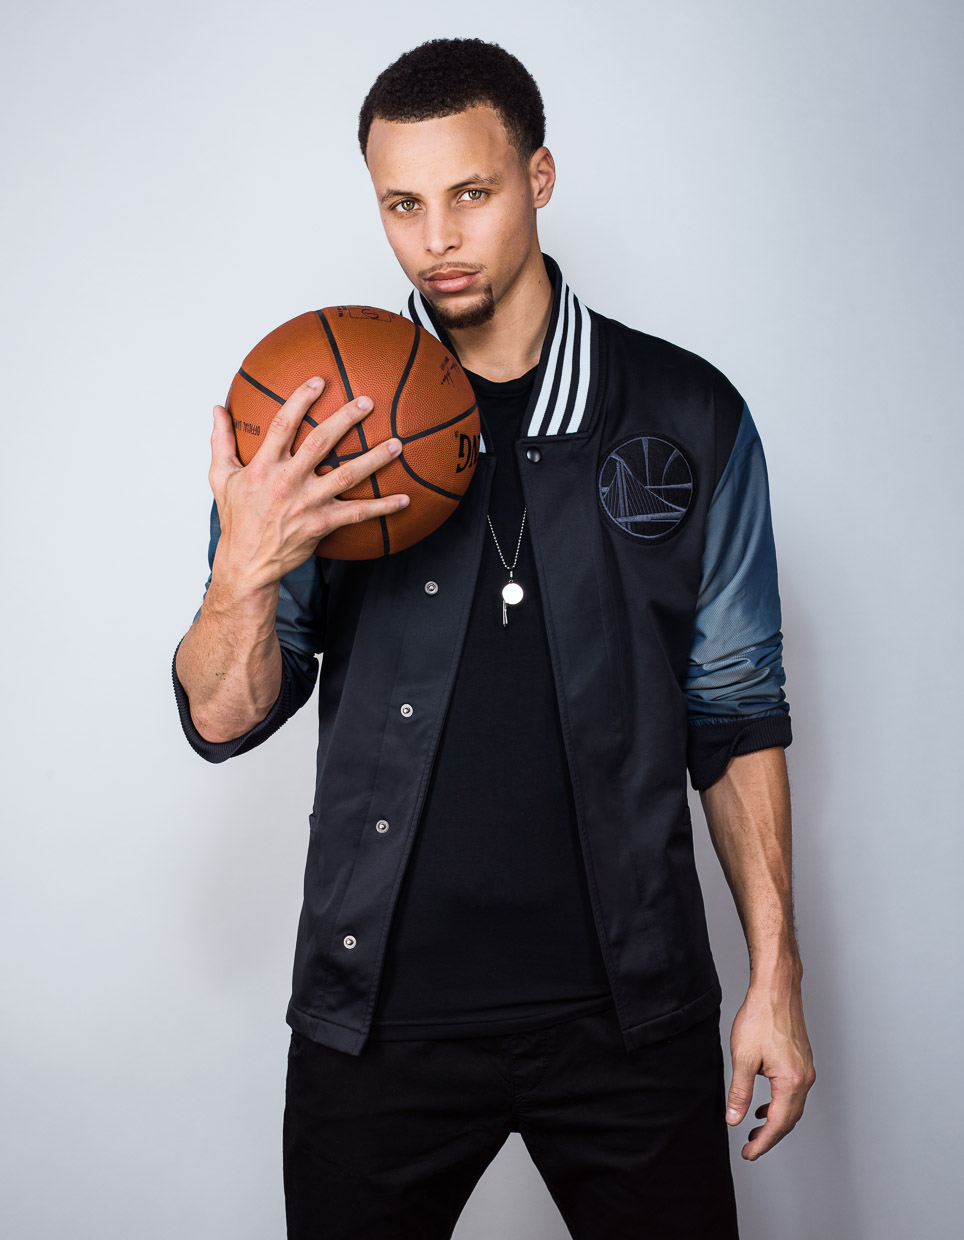 Steph Curry with basketball Lifestyle Photography from K2 Productions